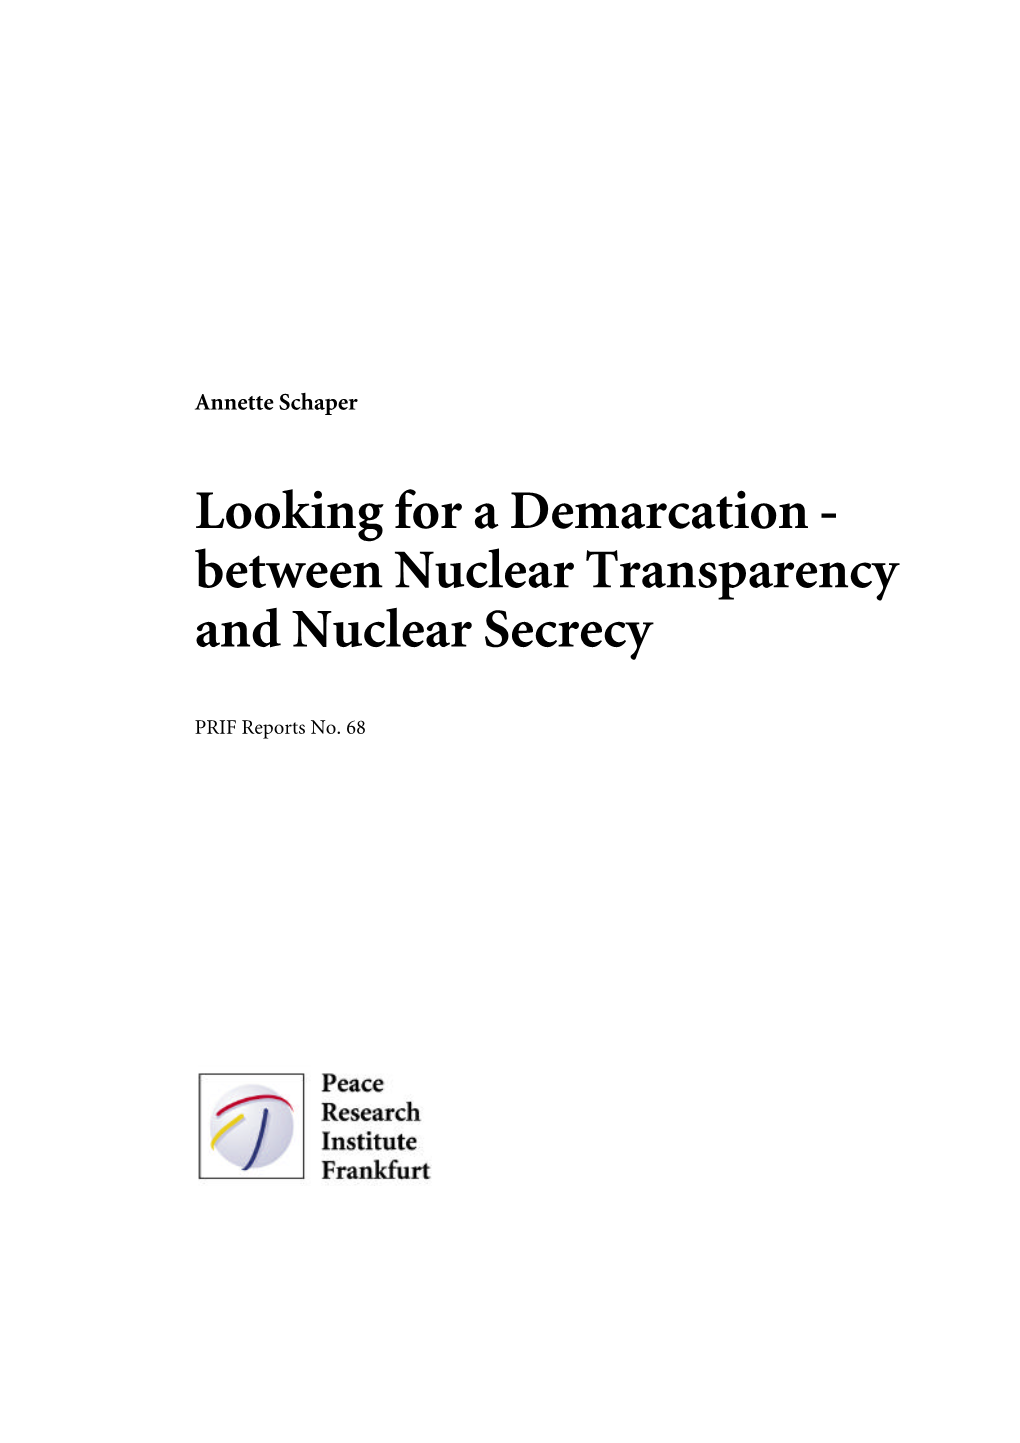 Between Nuclear Transparency and Nuclear Secrecy